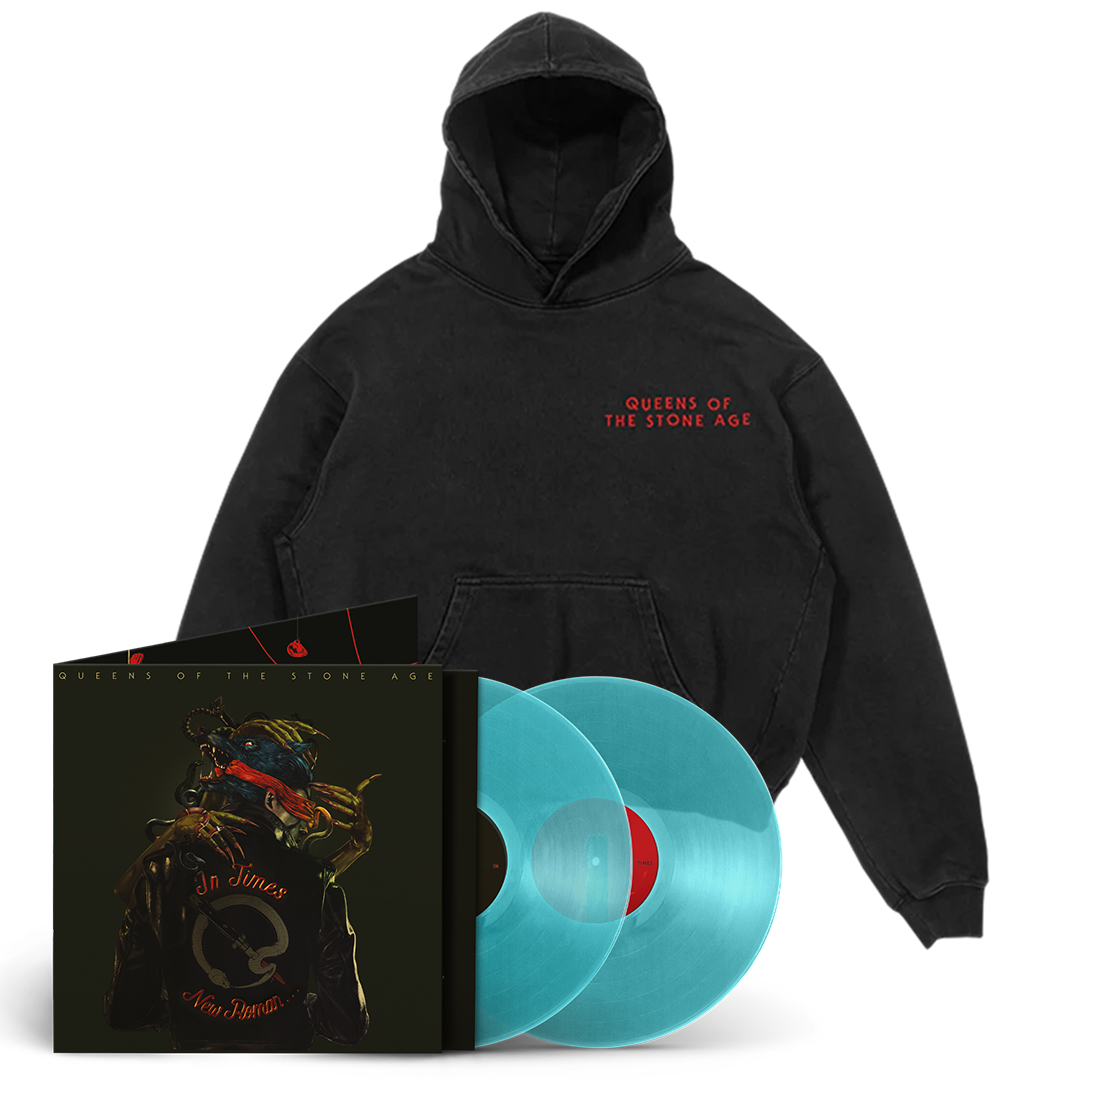 In Times New Roman... Translucent Blue 2lp + In Times New Roman... Snake Hoodie